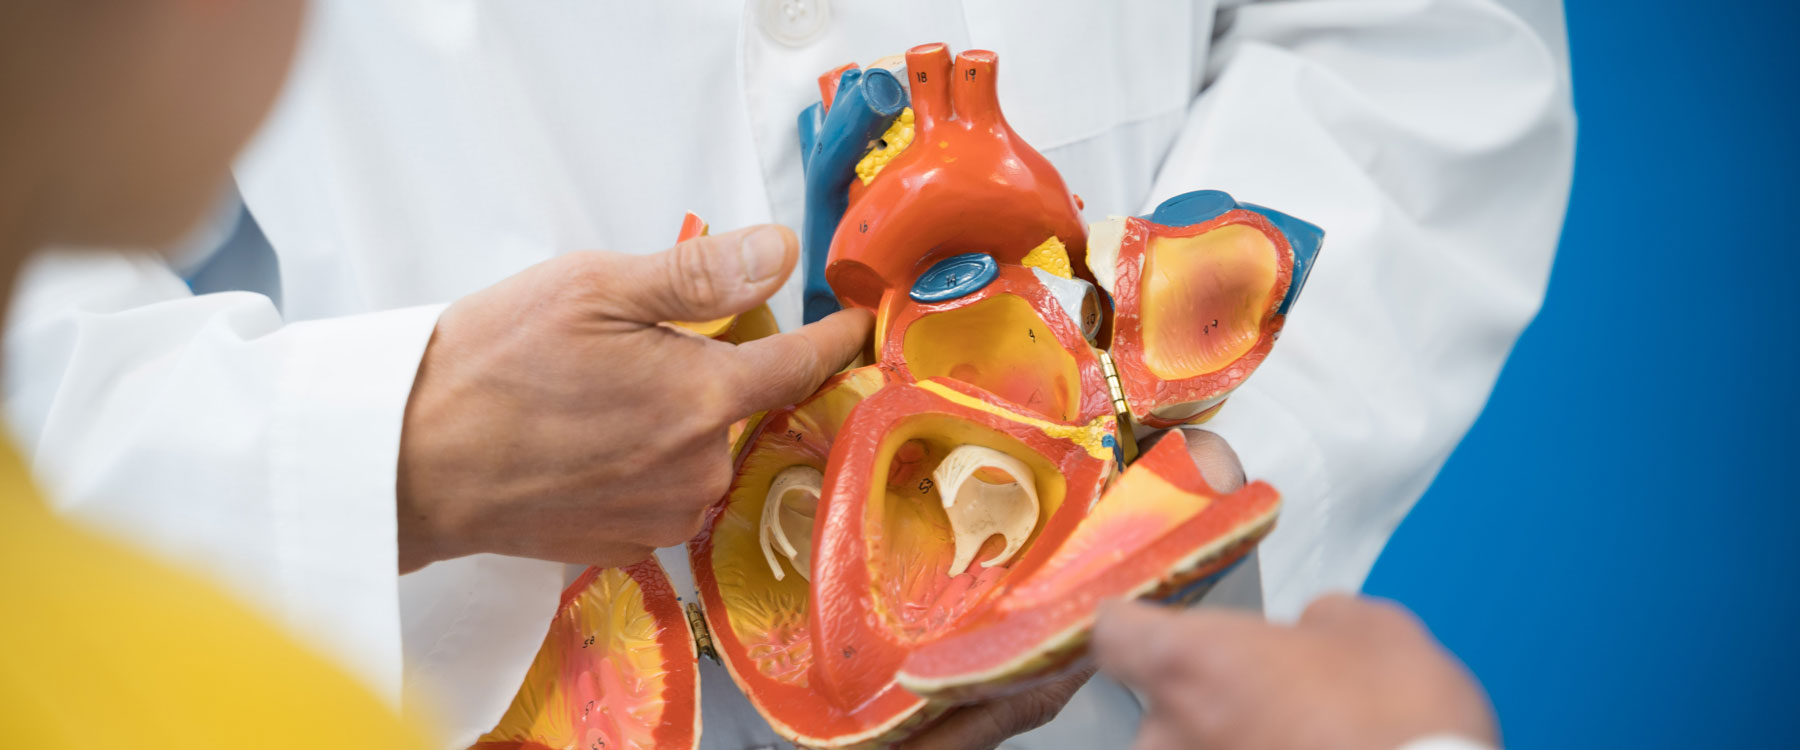 A close-up of a doctor holding a model of a heart